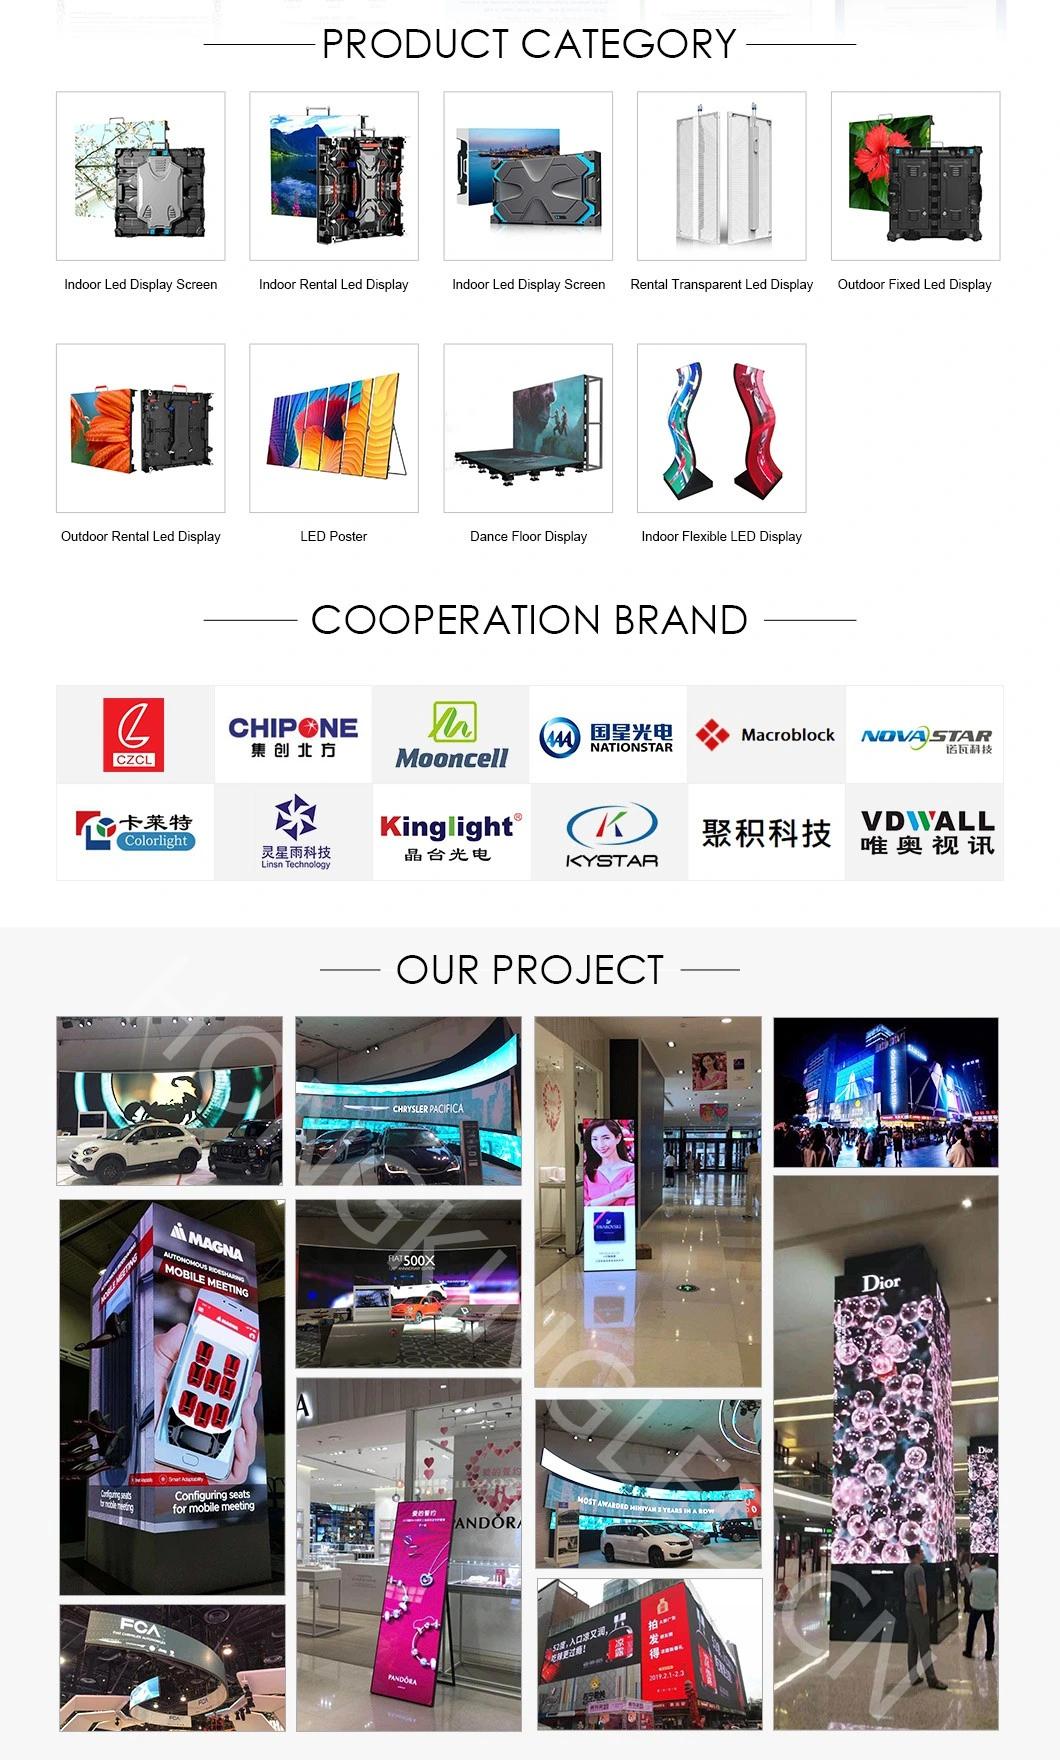 Full Color P5 LED Video Wall Indoor LED Screen Display